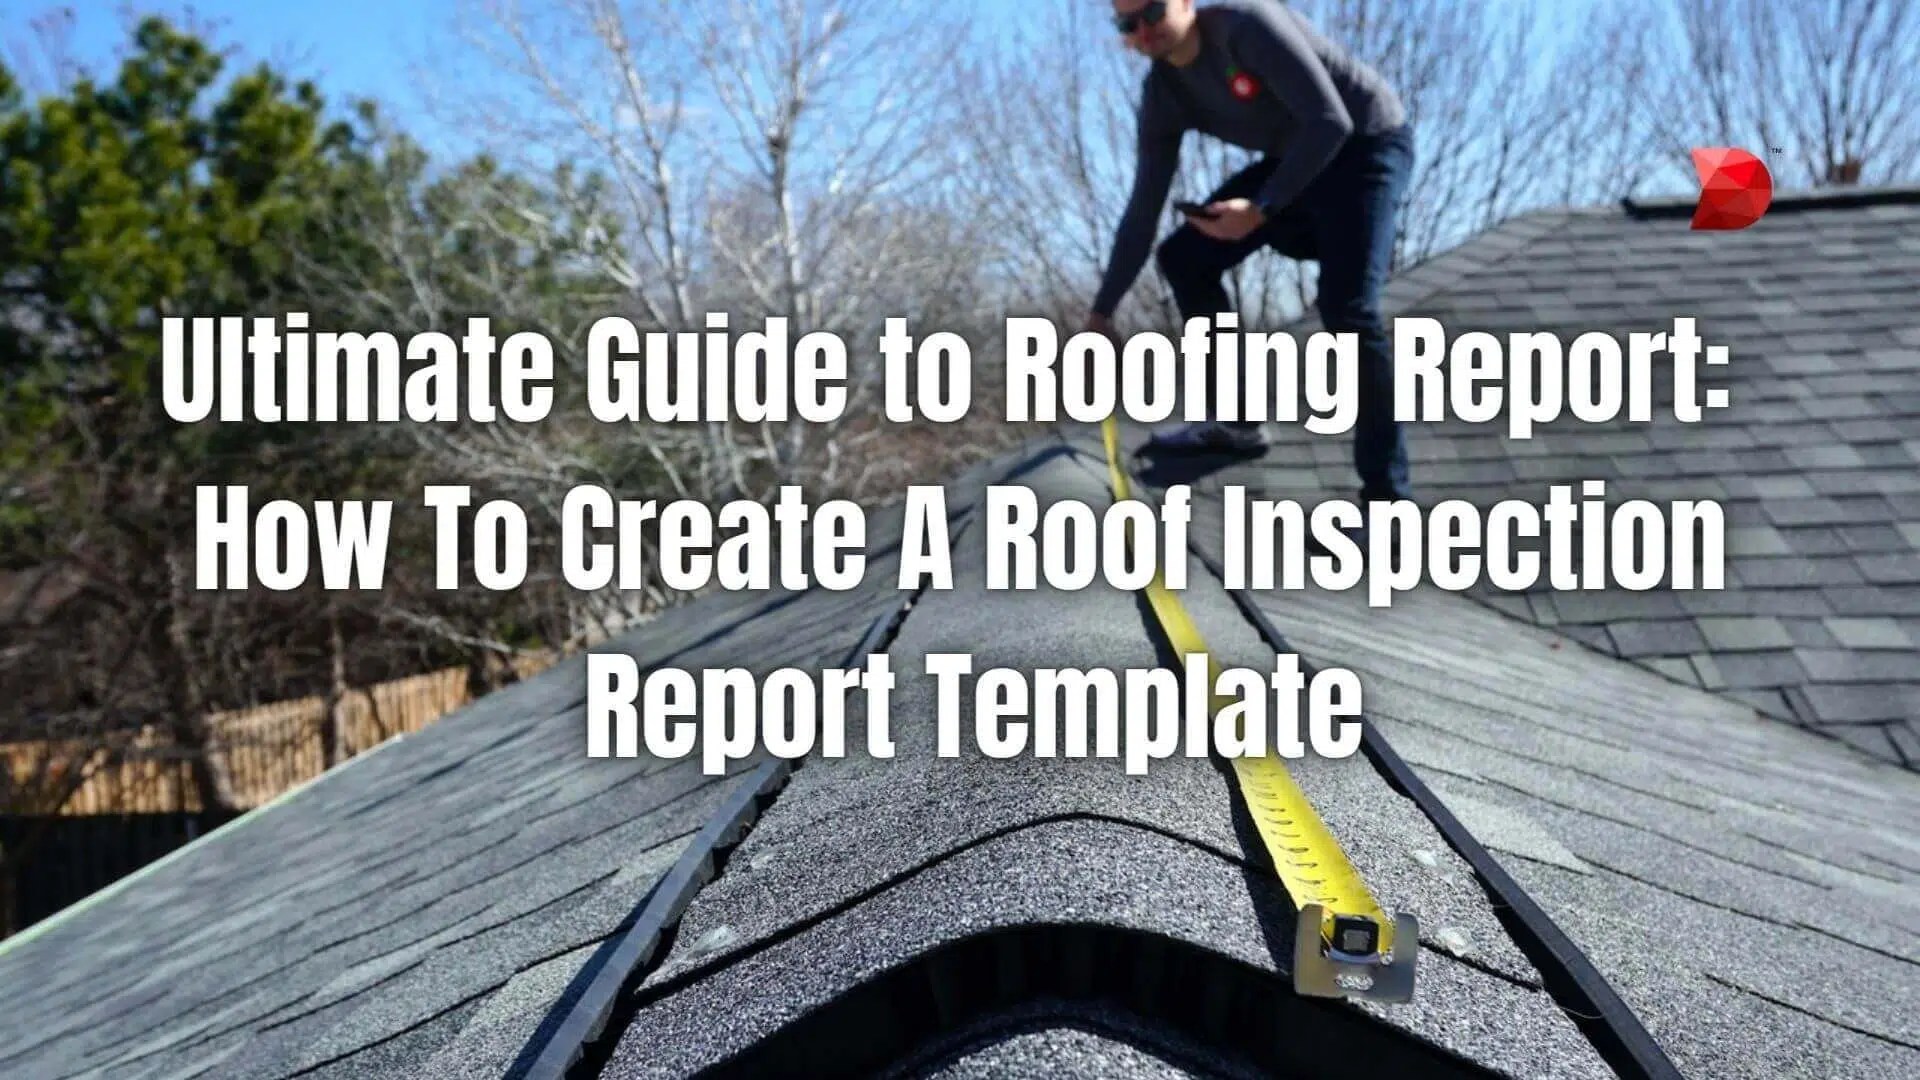 How To Start Your Own Roofing Company